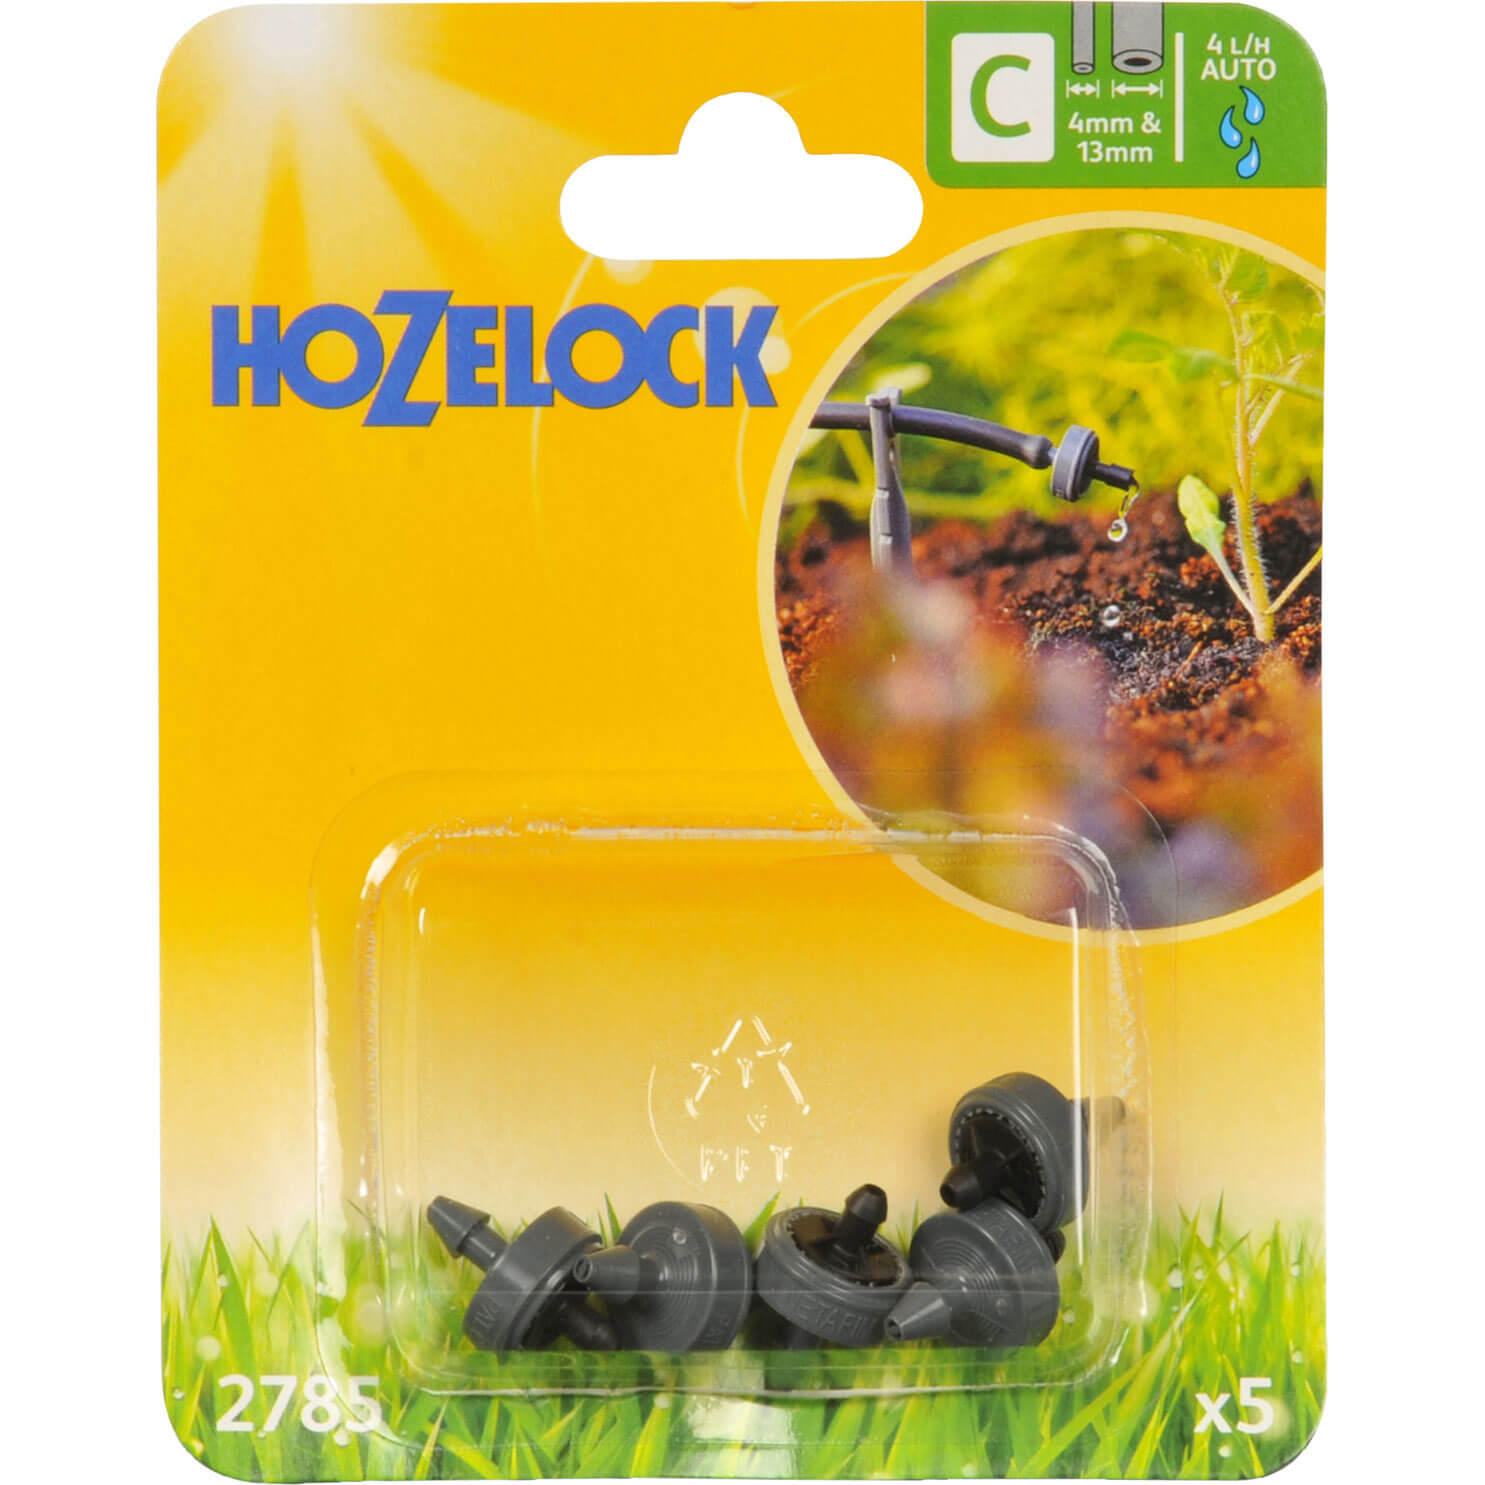 Hozelock 4LPH End of Line Pressure Compensating Dripper Pack of 5 for 4mm Auto Watering System